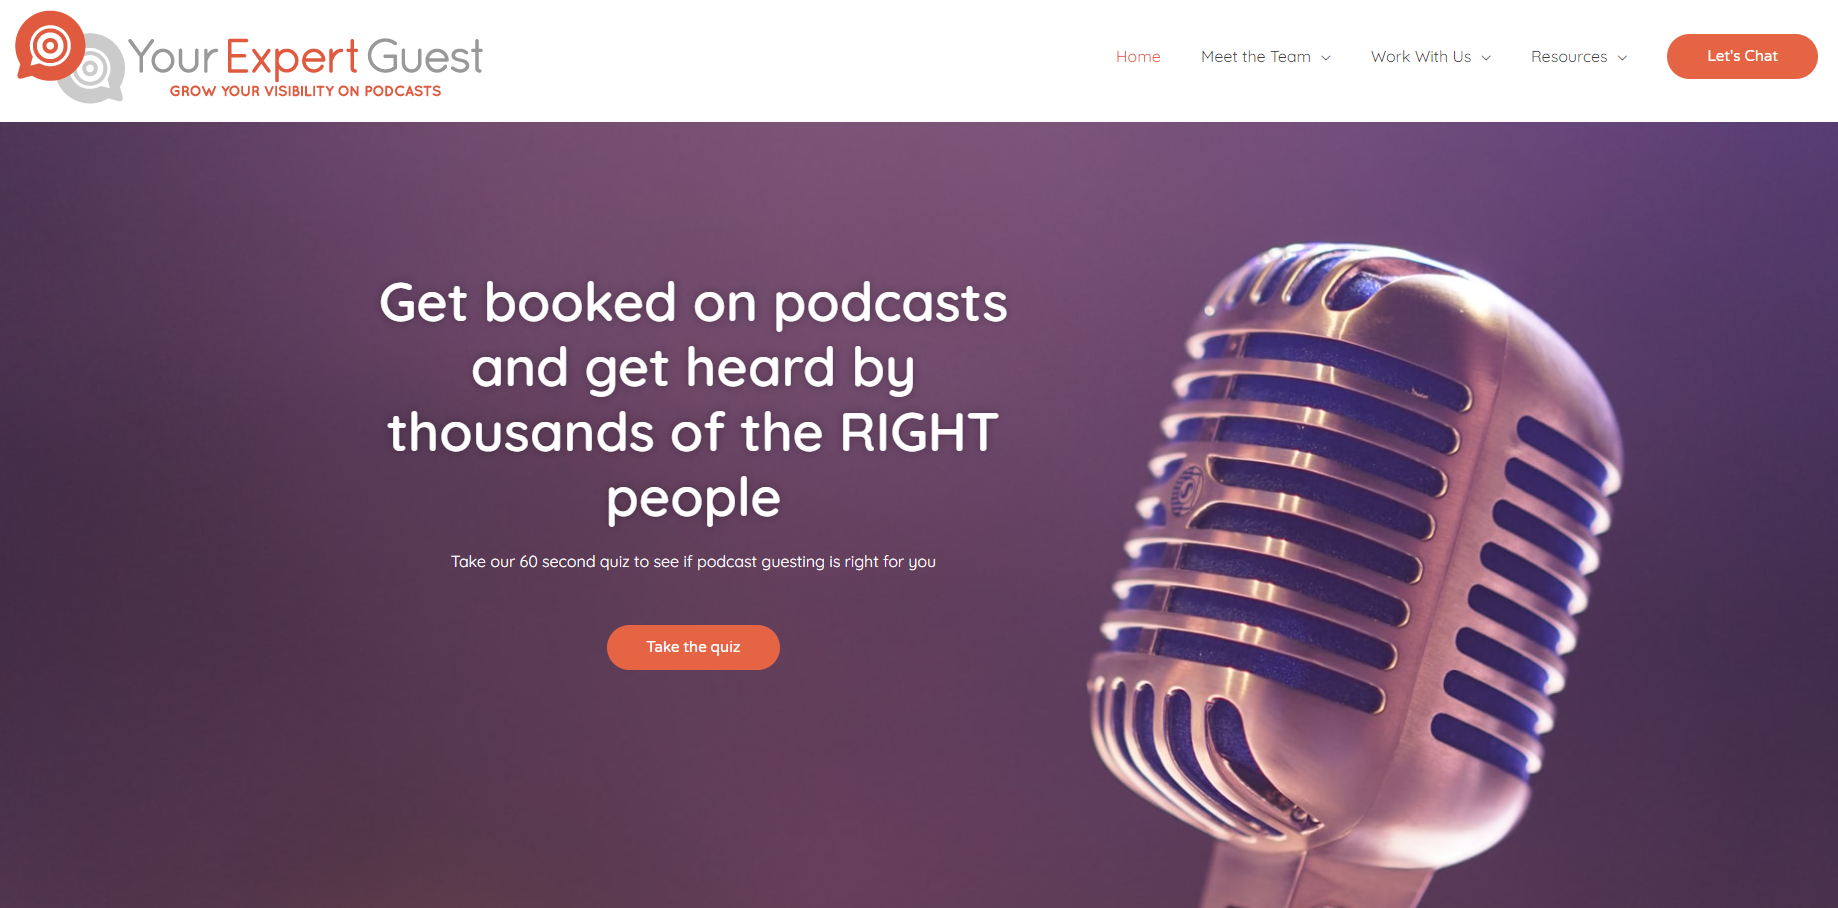 Your Expert Guest booking agency